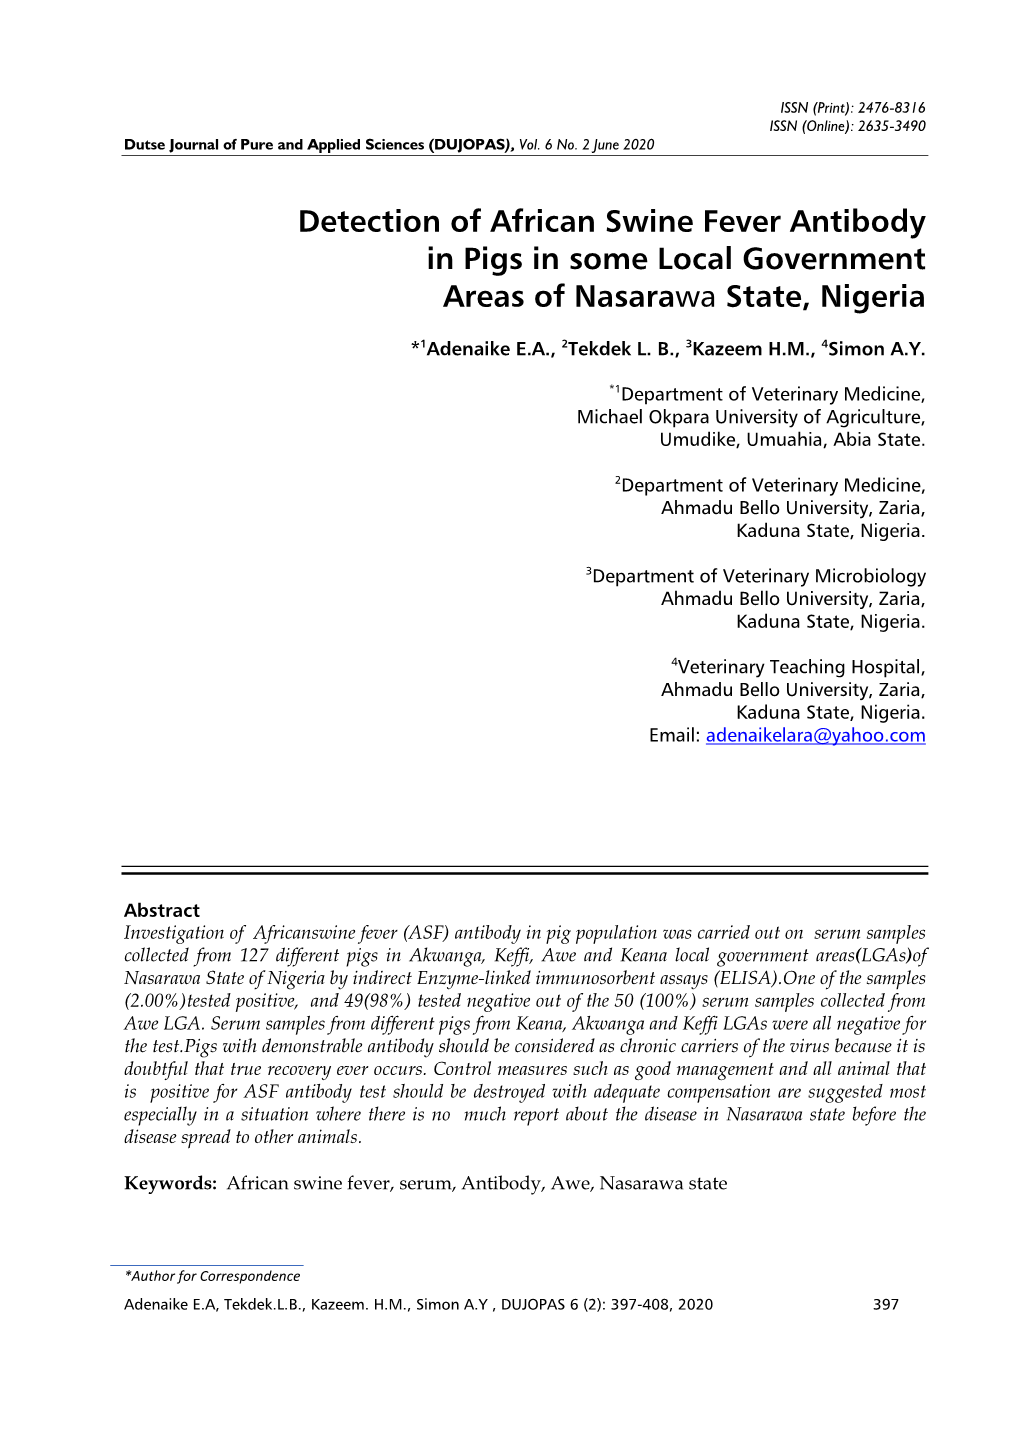 Detection of African Swine Fever Antibody in Pigs in Some Local Government Areas of Nasarawa State, Nigeria